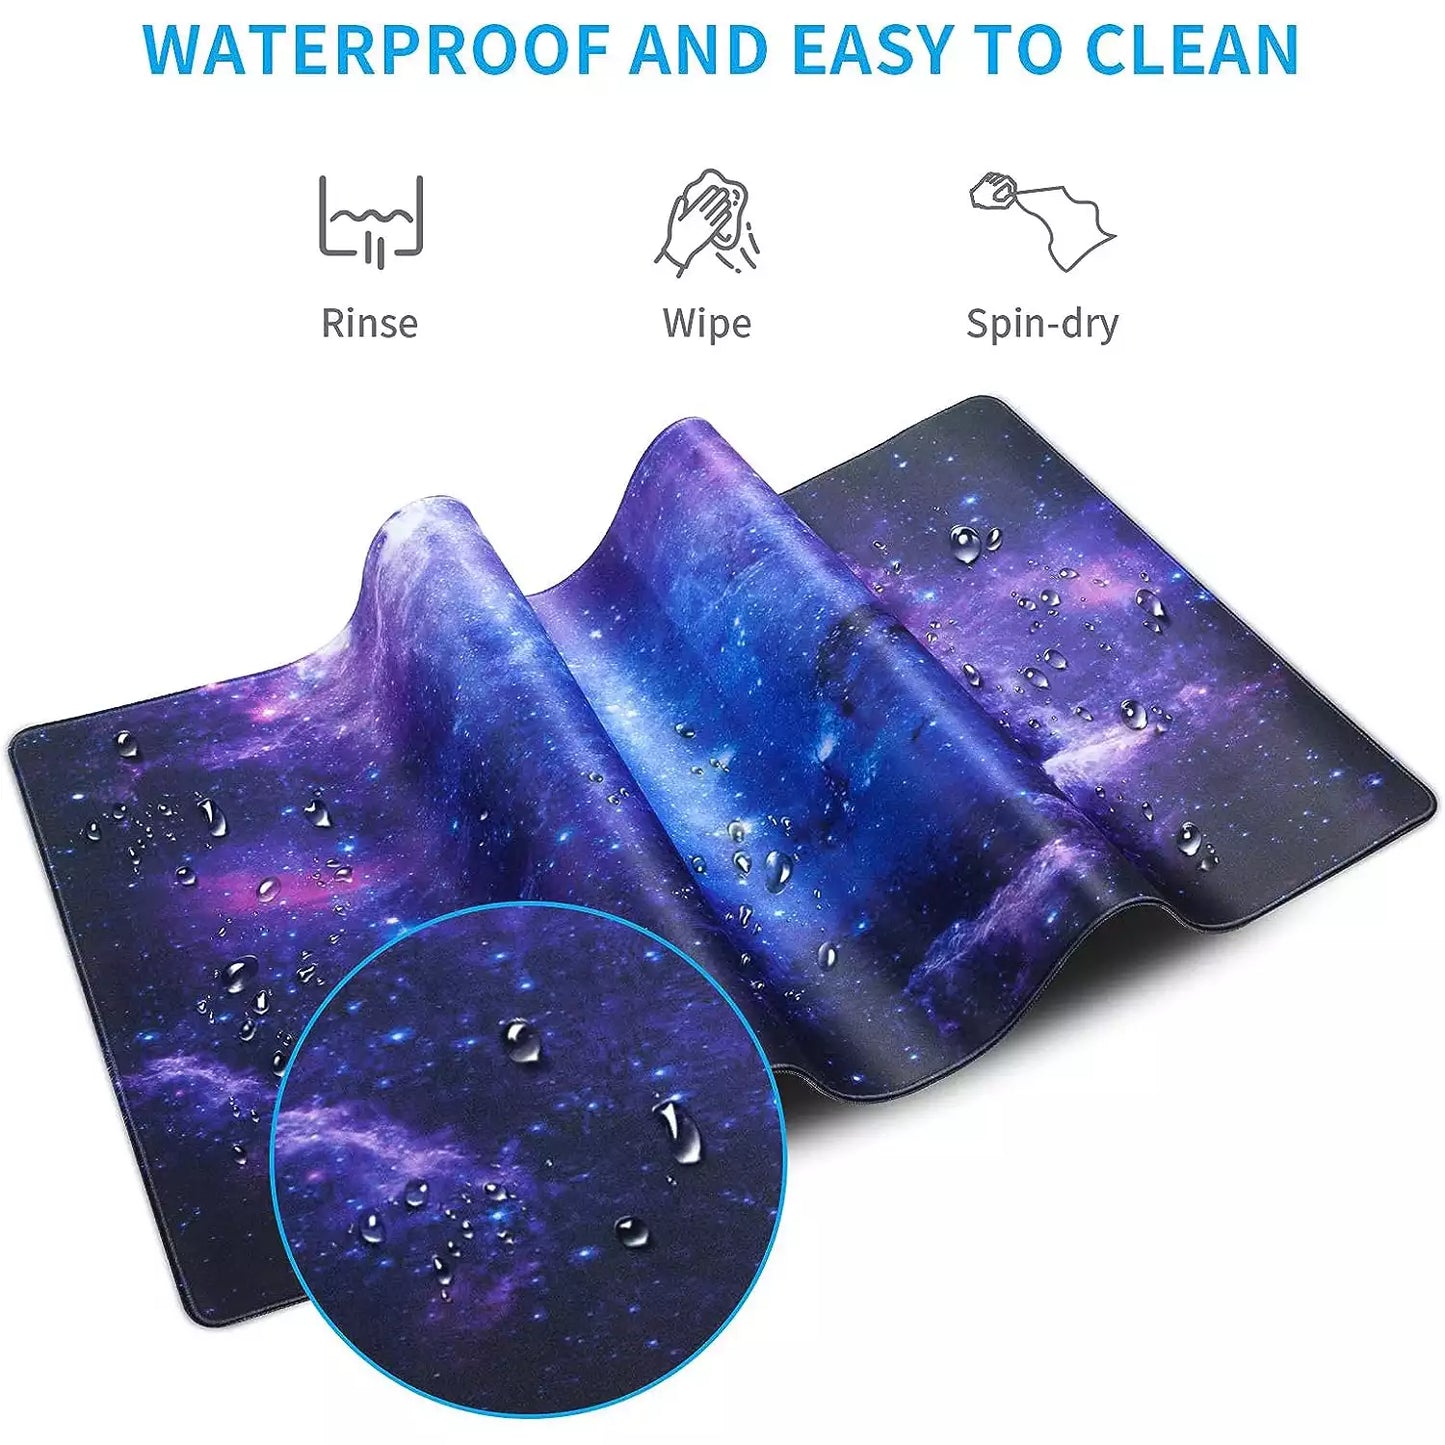 GALAXY Gaming Mouse Pad – Extended Size 80 x 30 CM